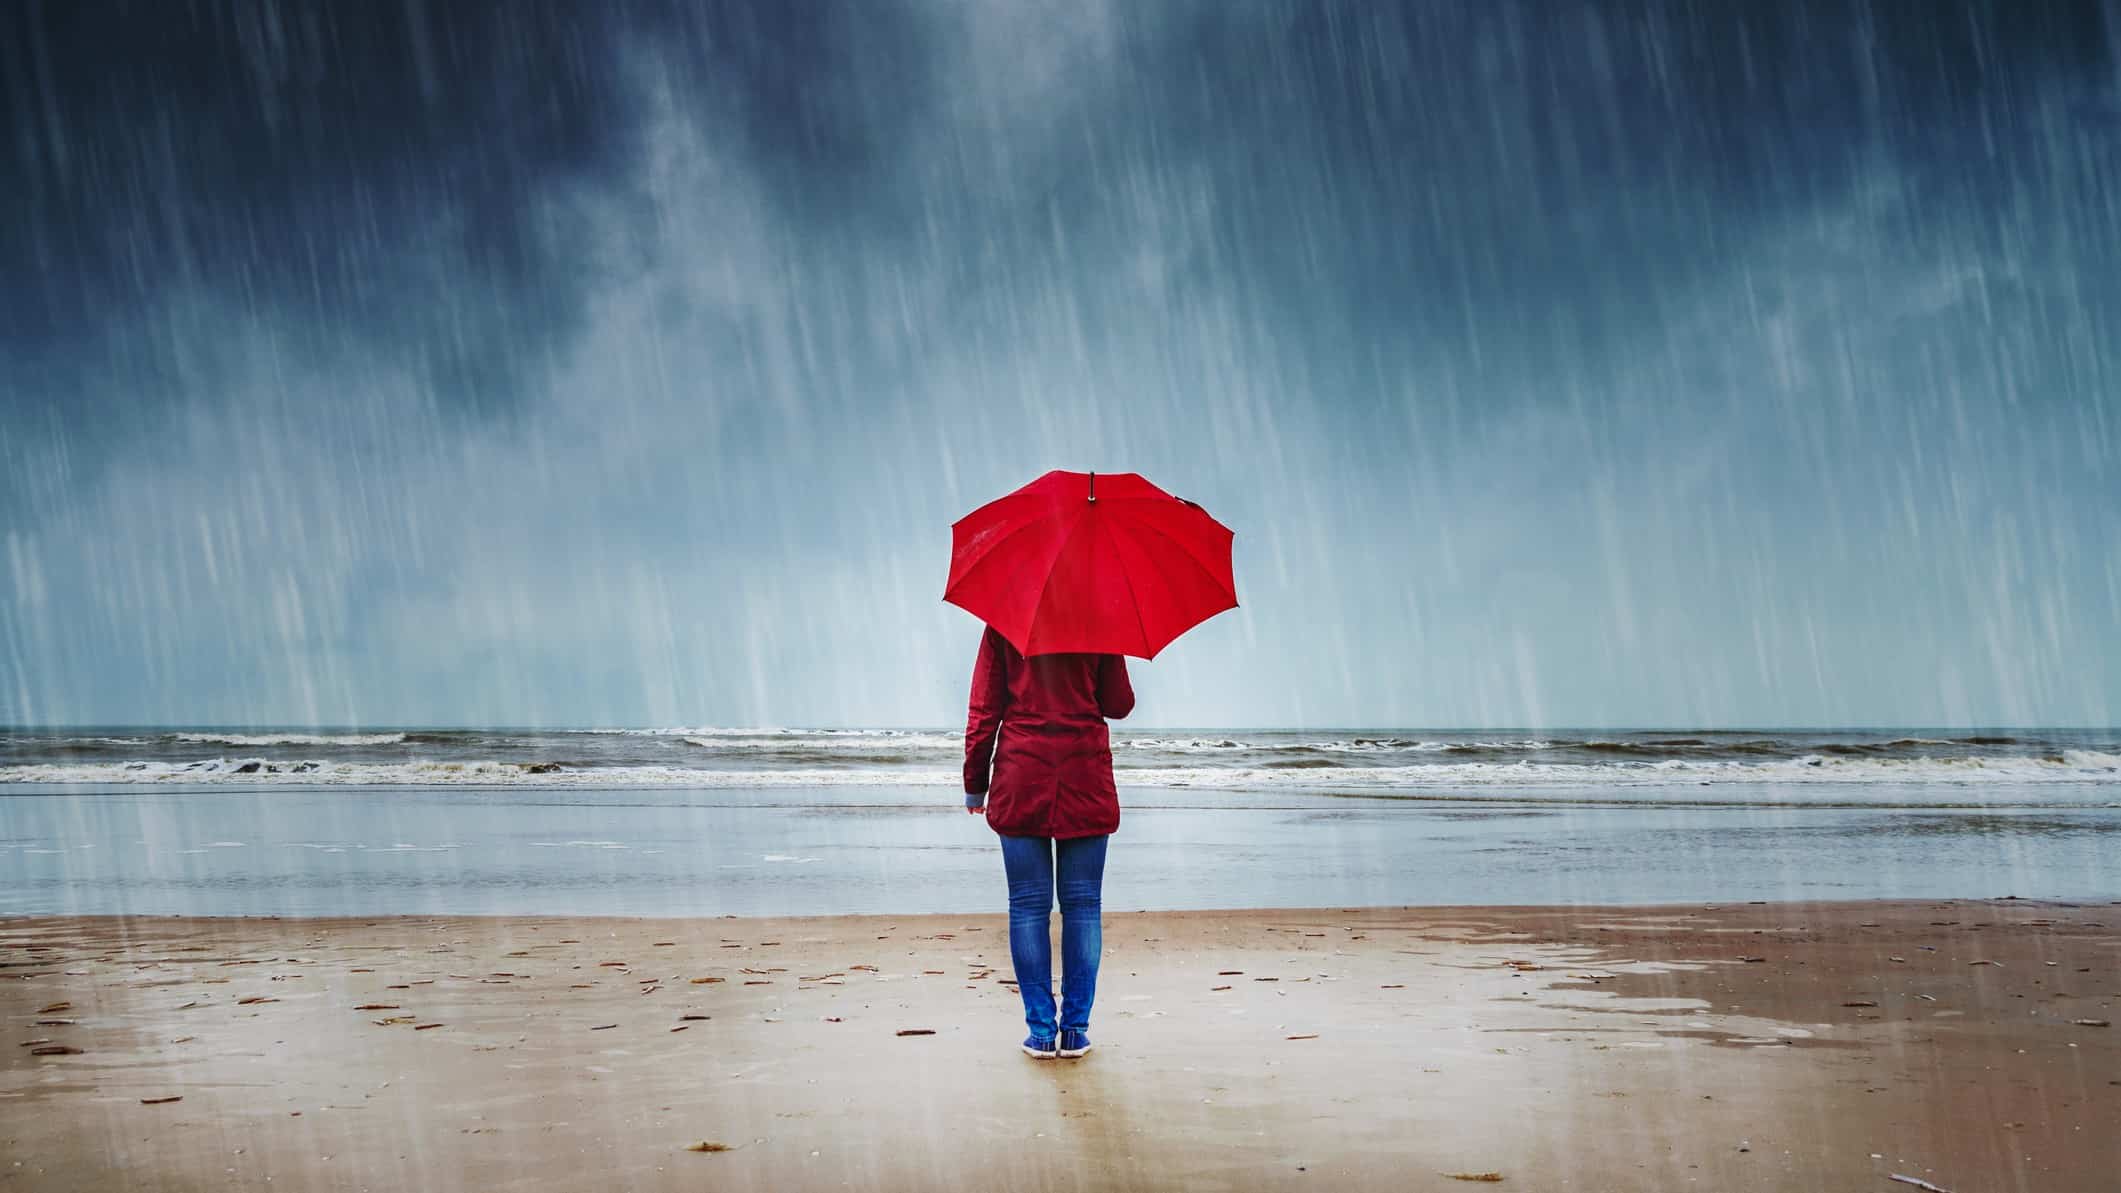 a woman under an umbrella stands looking out to sea on a beach in heavy rain with grey clouds gathering over the ocean.